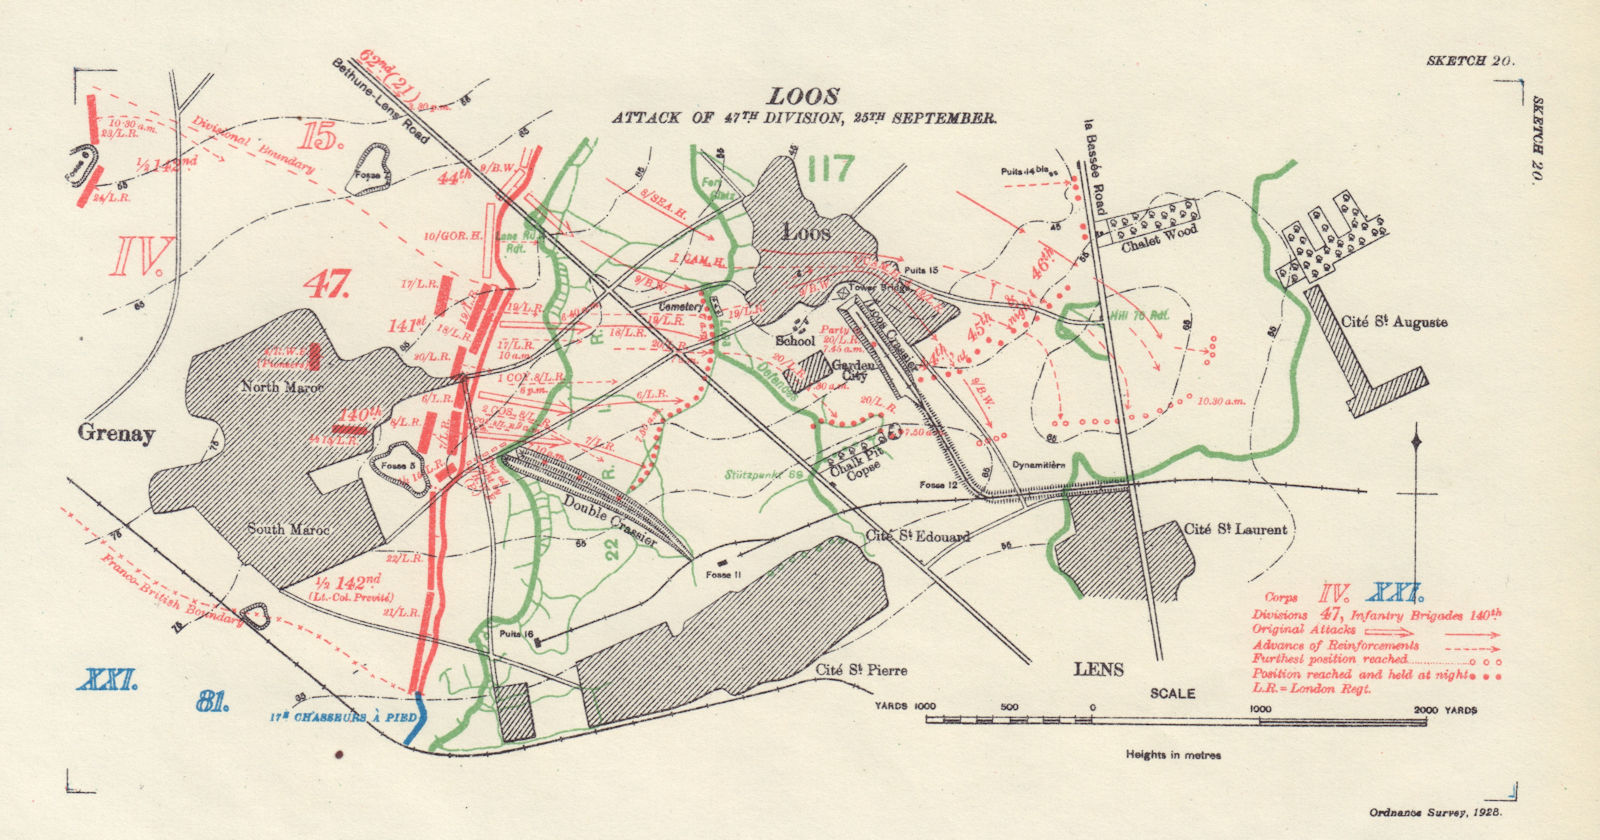 Battle of Loos, 47th Division attack, 25th September 1915. WW1 Trenches 1928 map